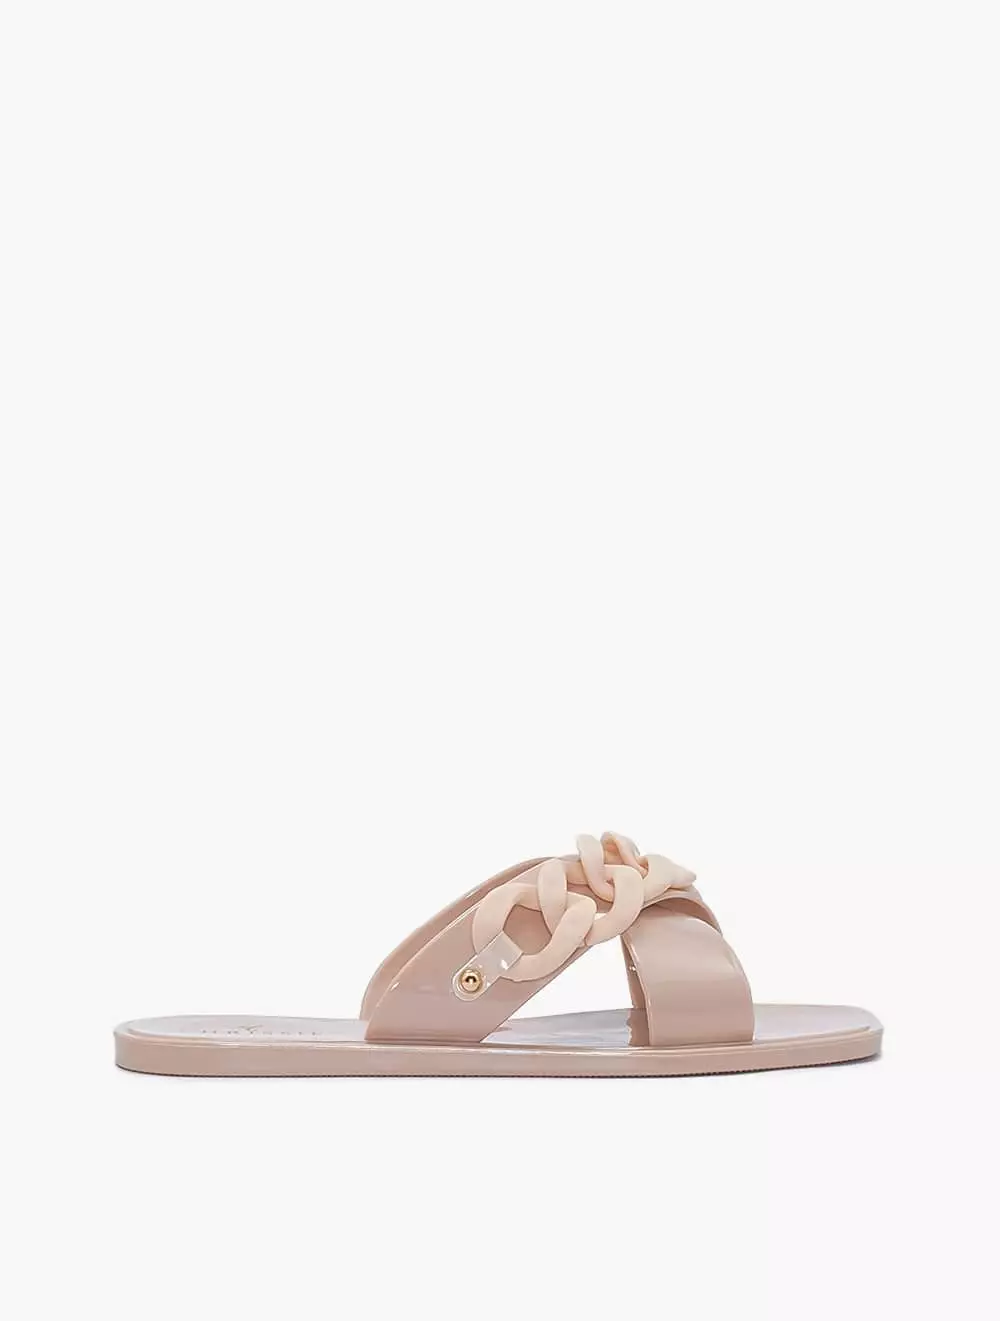 Jual PAYLESS Payless Chrissie Womens Farina Sandals - Nude_05 - Nude ...